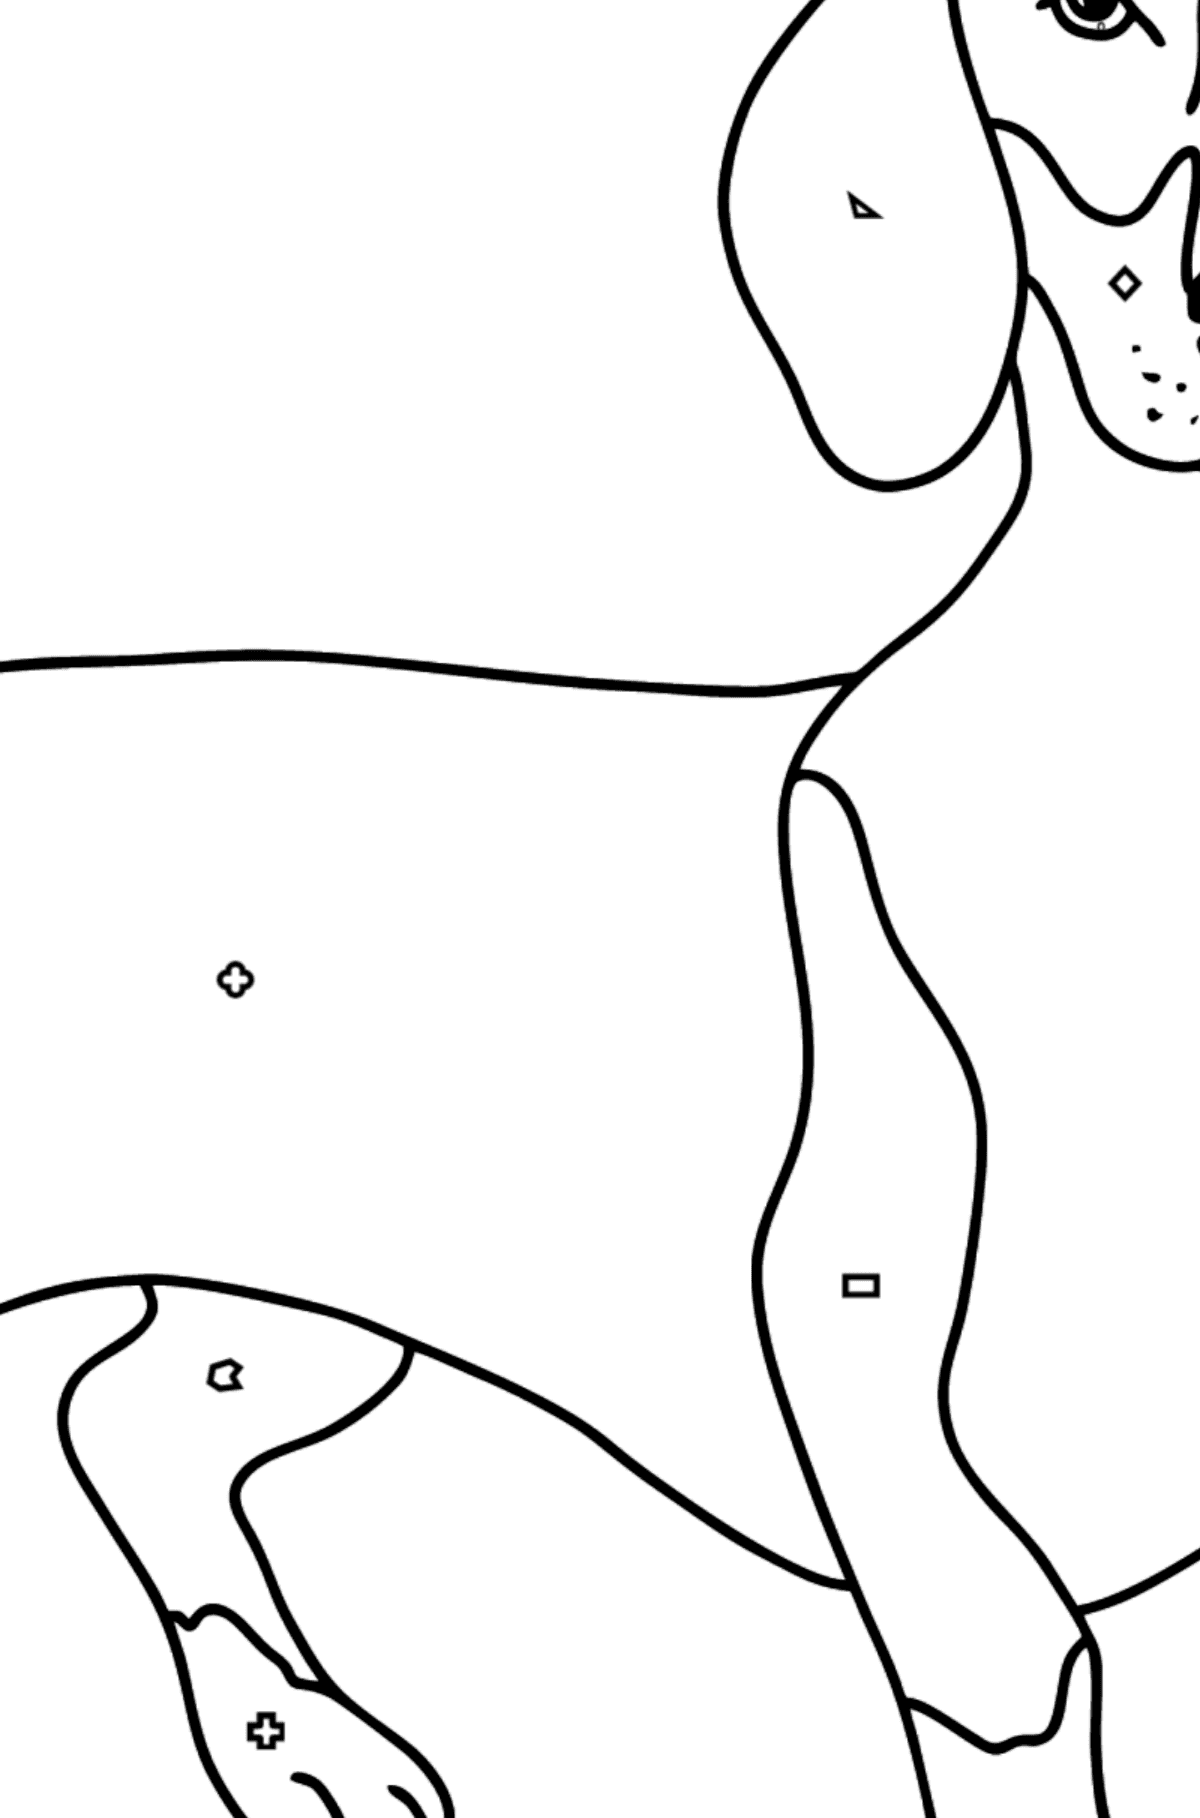 Dachshund coloring page - Coloring by Geometric Shapes for Kids